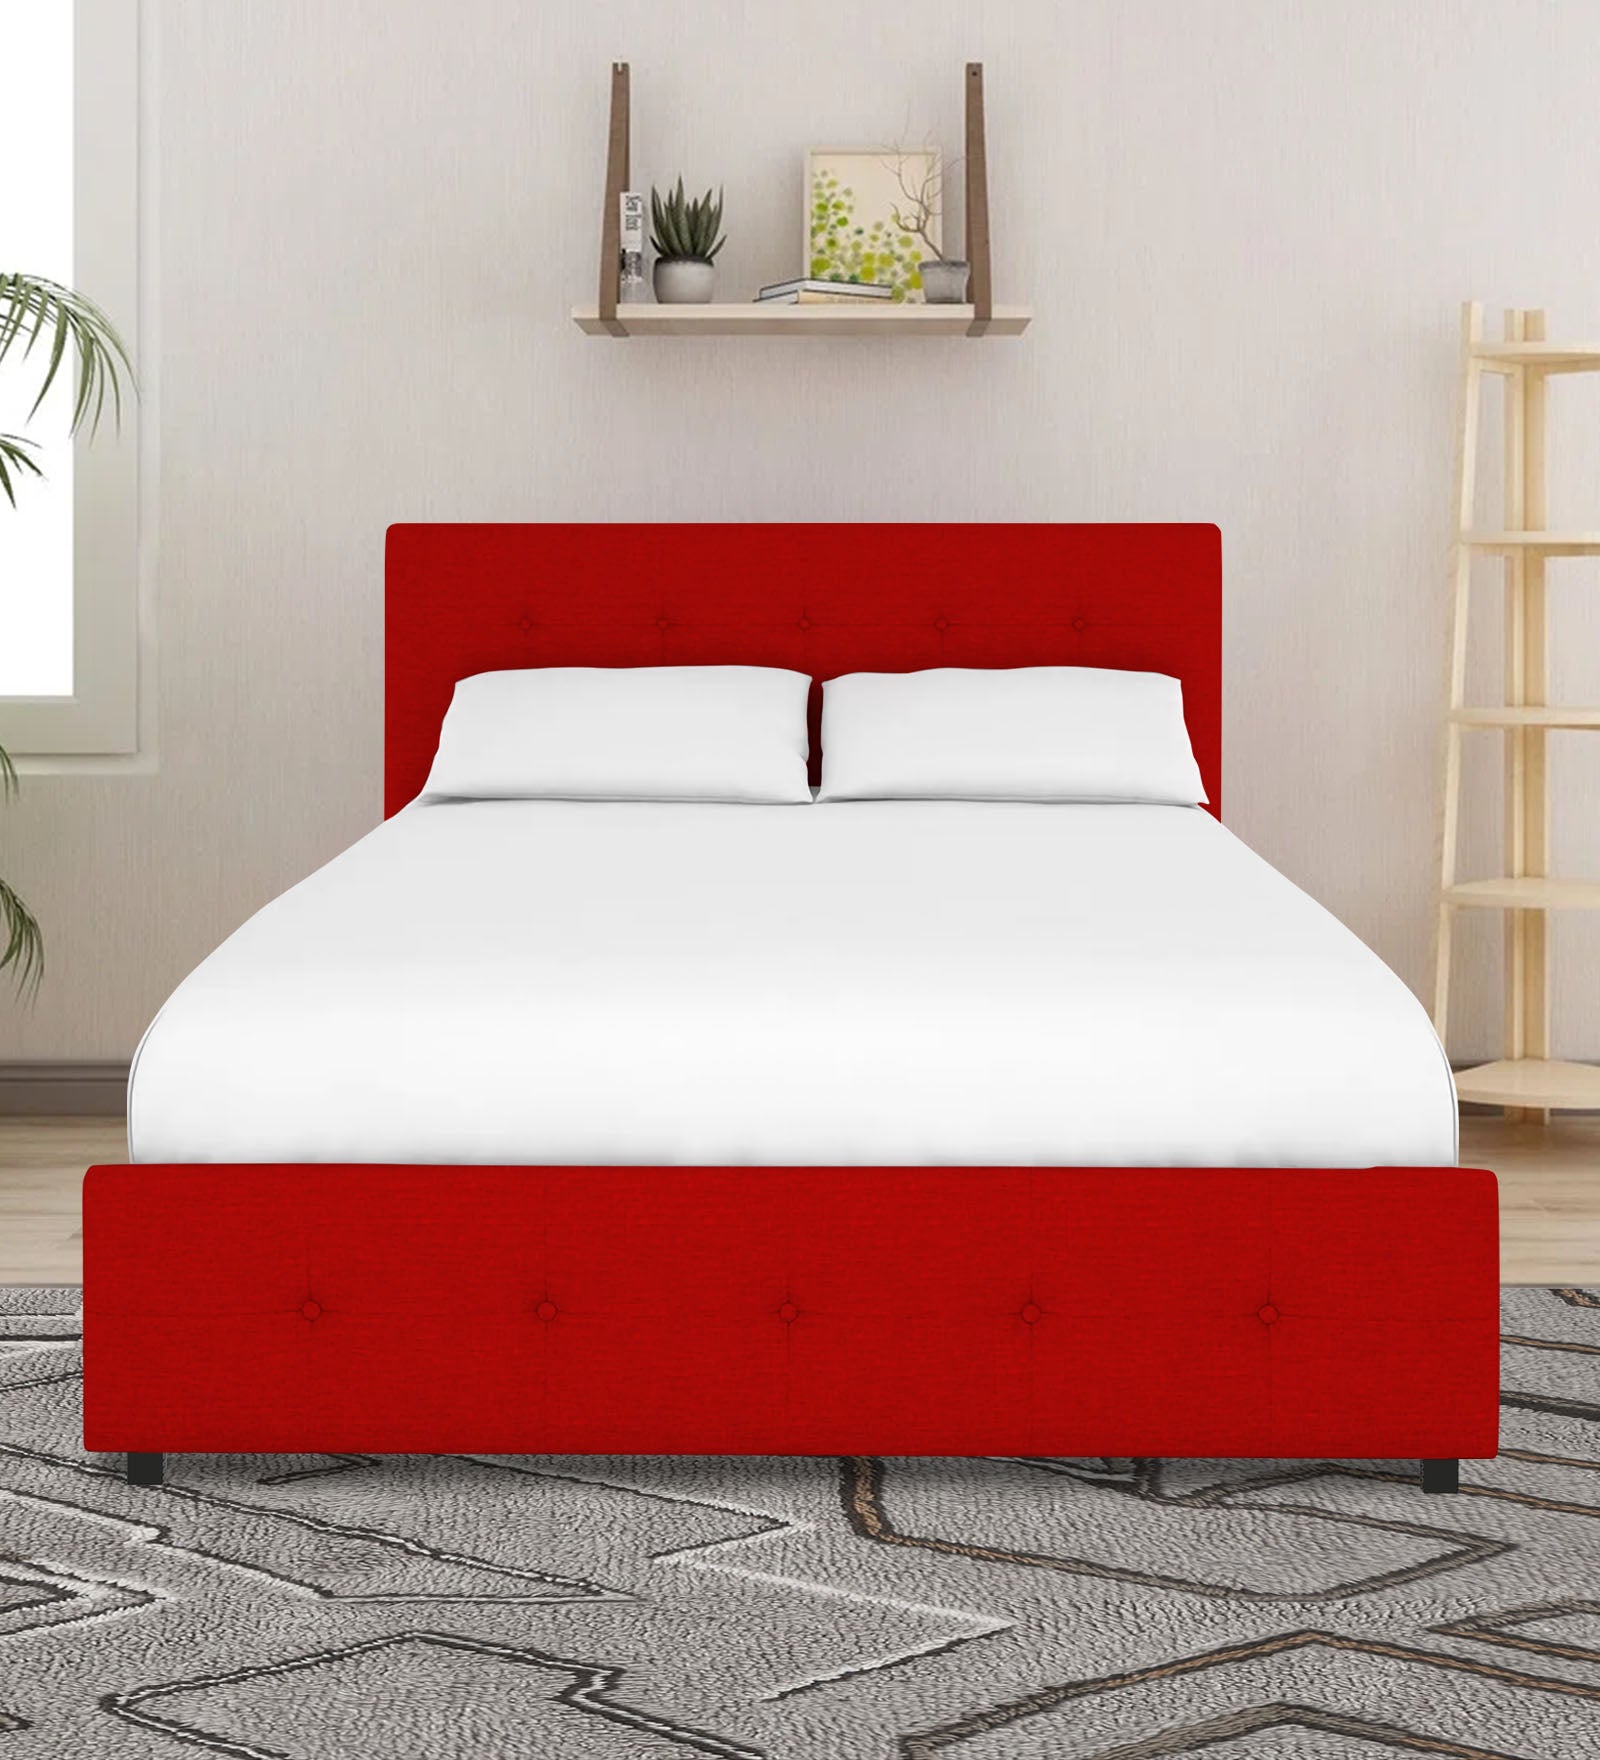 Lido Fabric Queen Size Bed In Ruby Red Colour With Storage